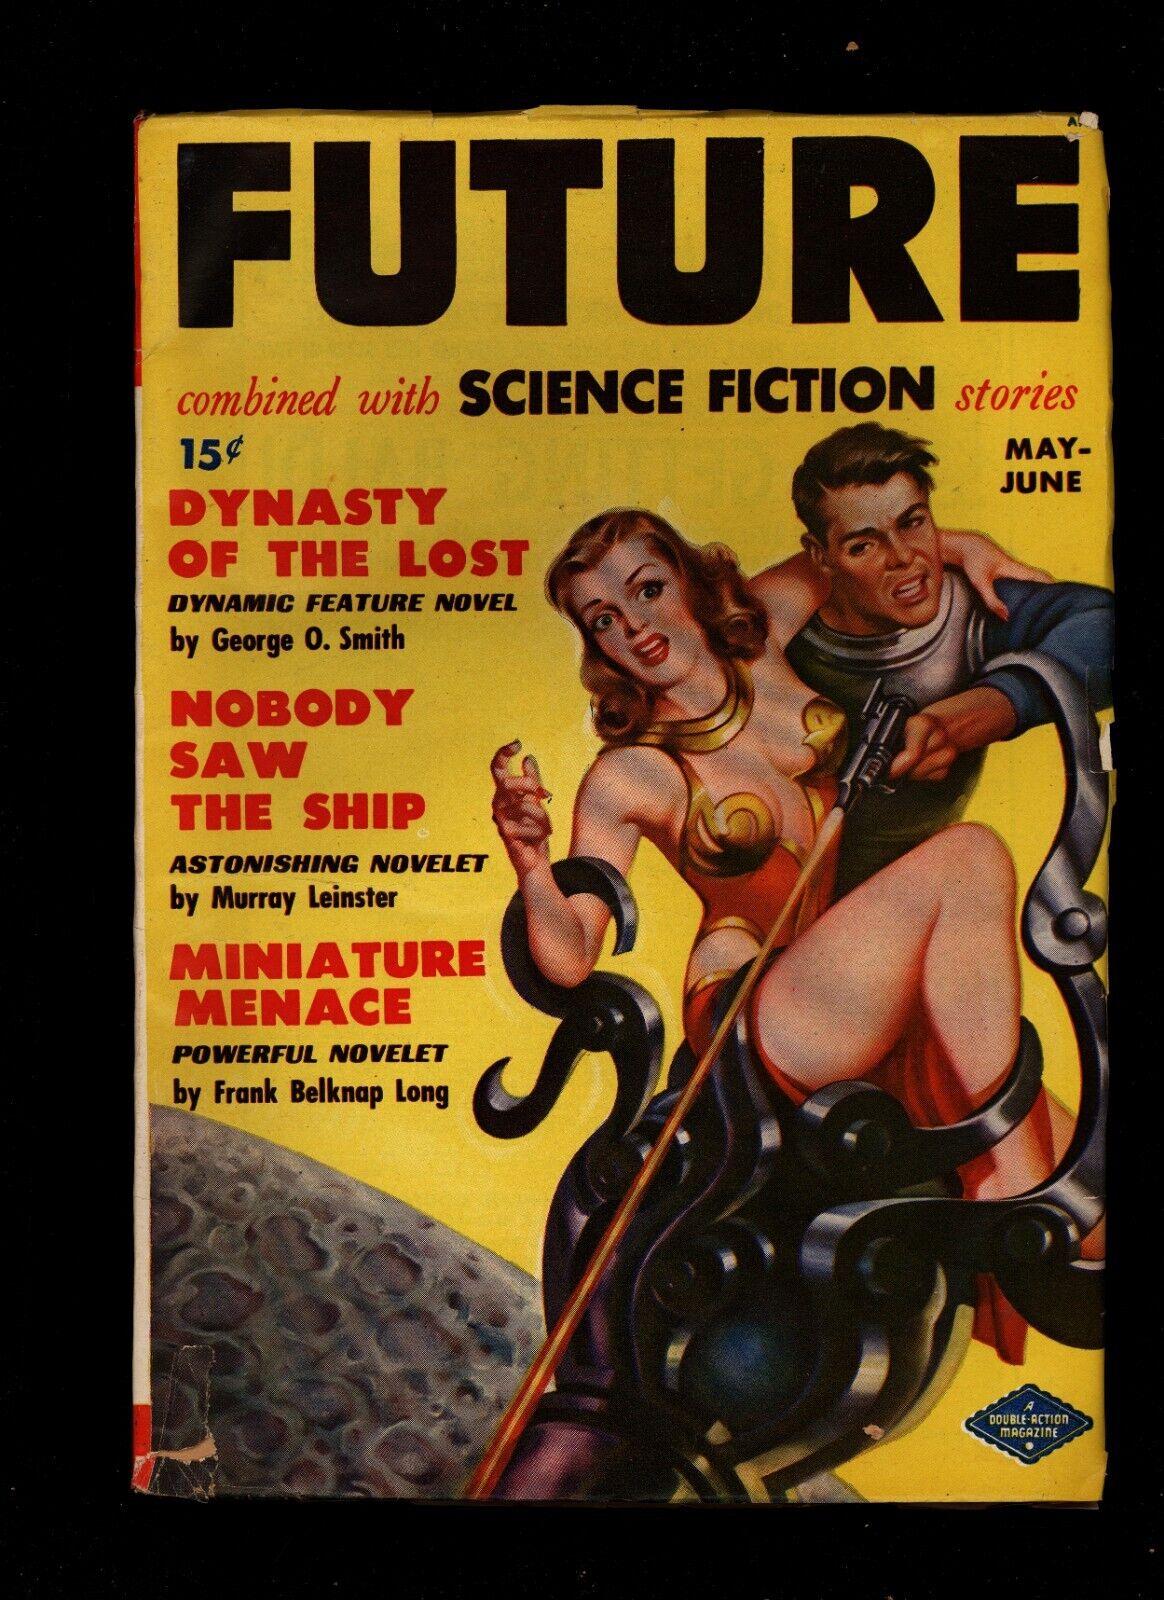 Future combined with Science Fiction stories May-June 1950 Pulp